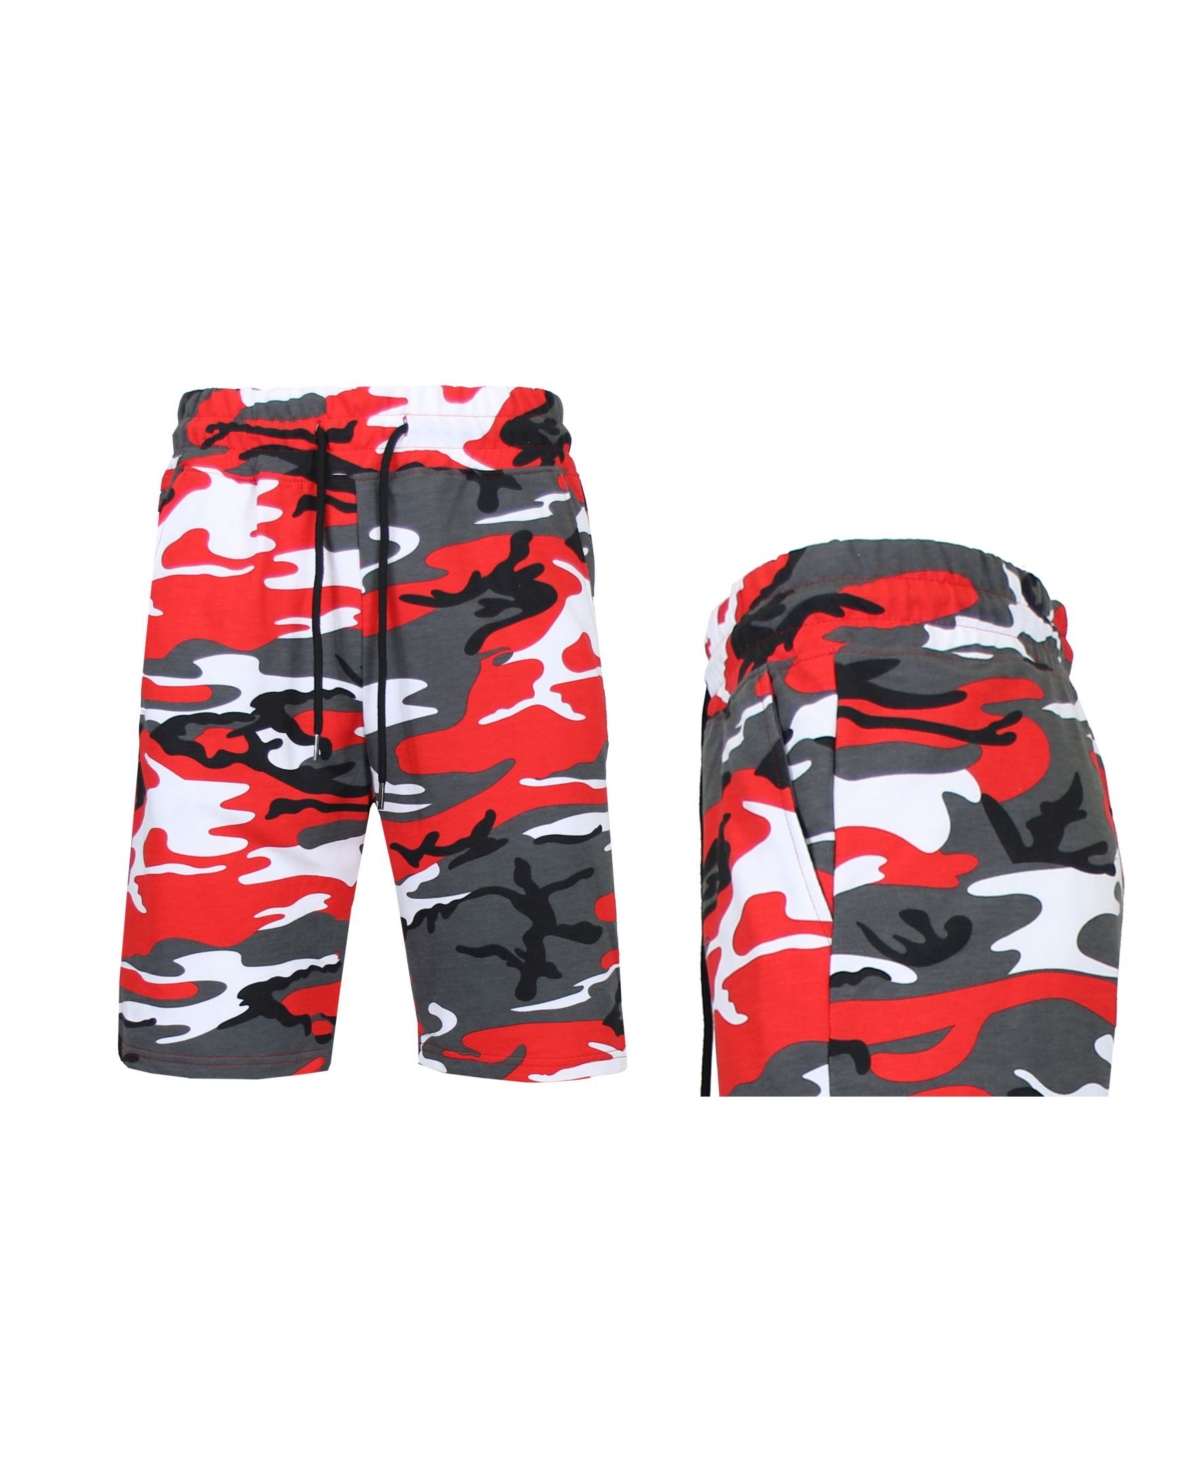 Men's French Terry Camo Printed Lounge Shorts - Multi